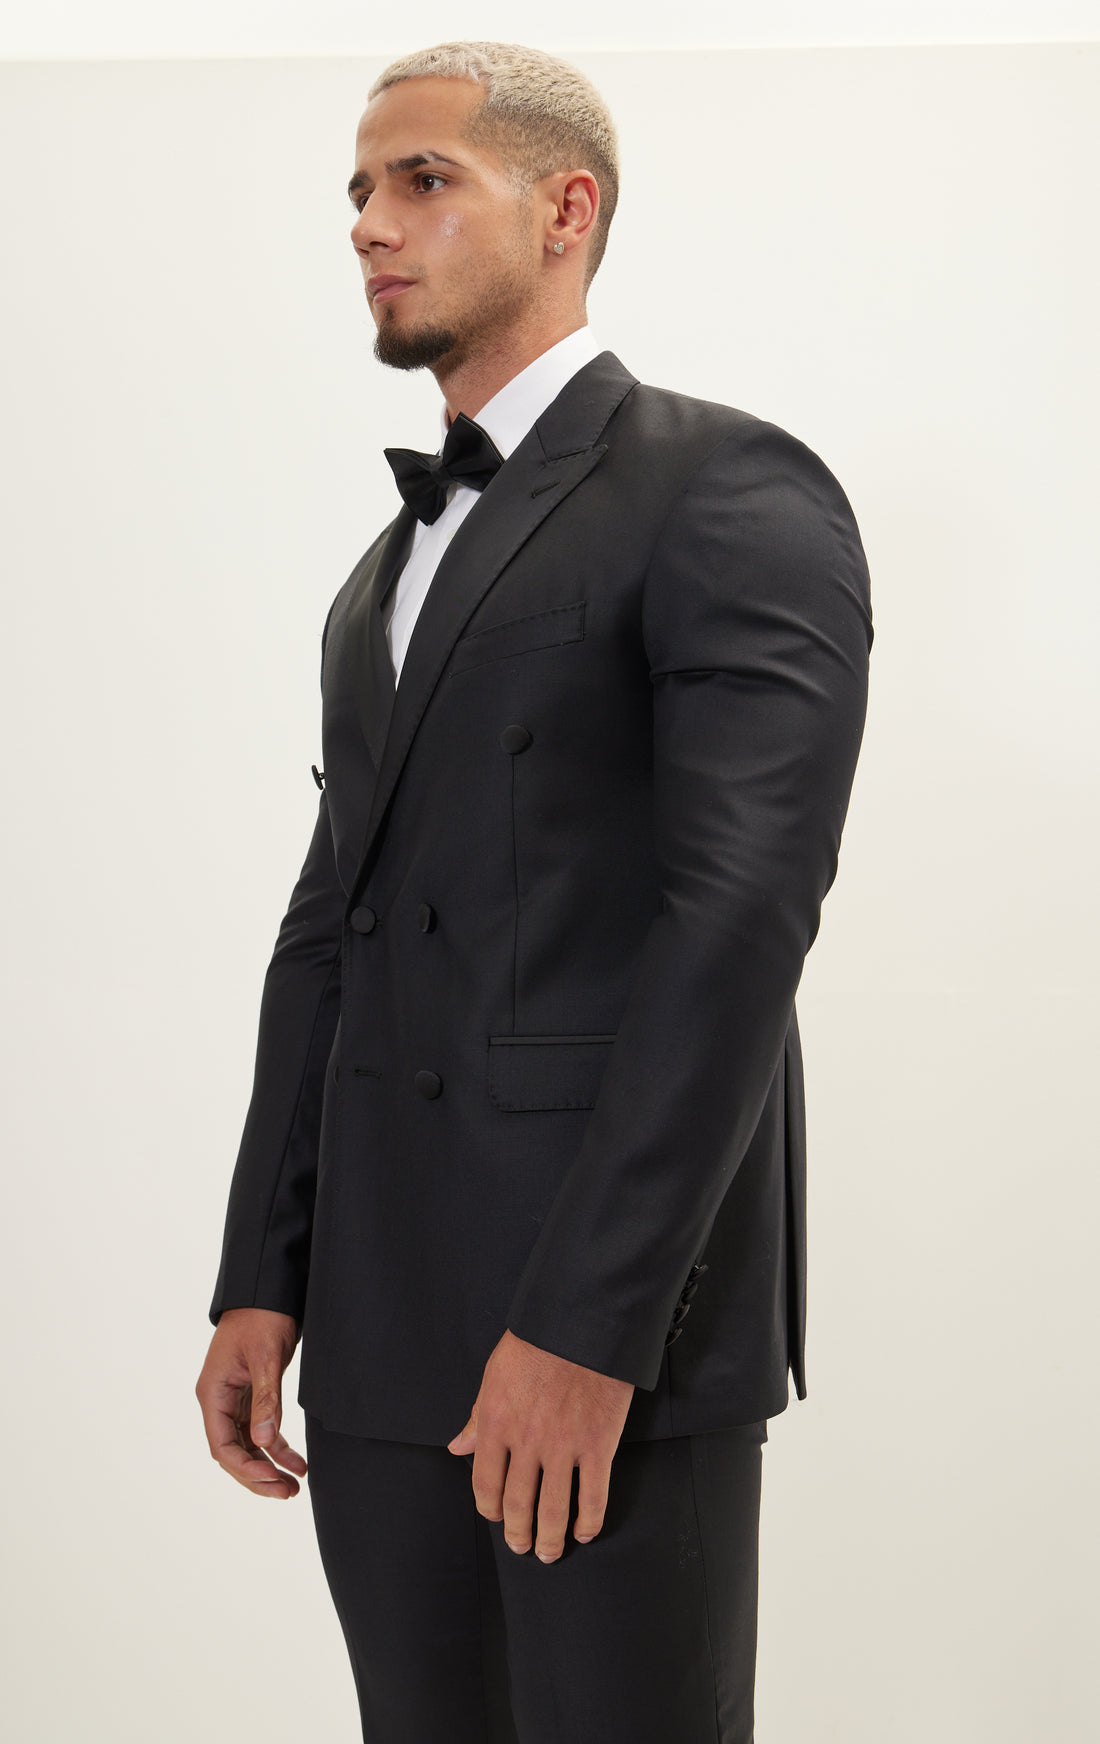 N° R276 SUPER 180S WOOL DOUBLE BREASTED TUXEDO SUIT- BLACK